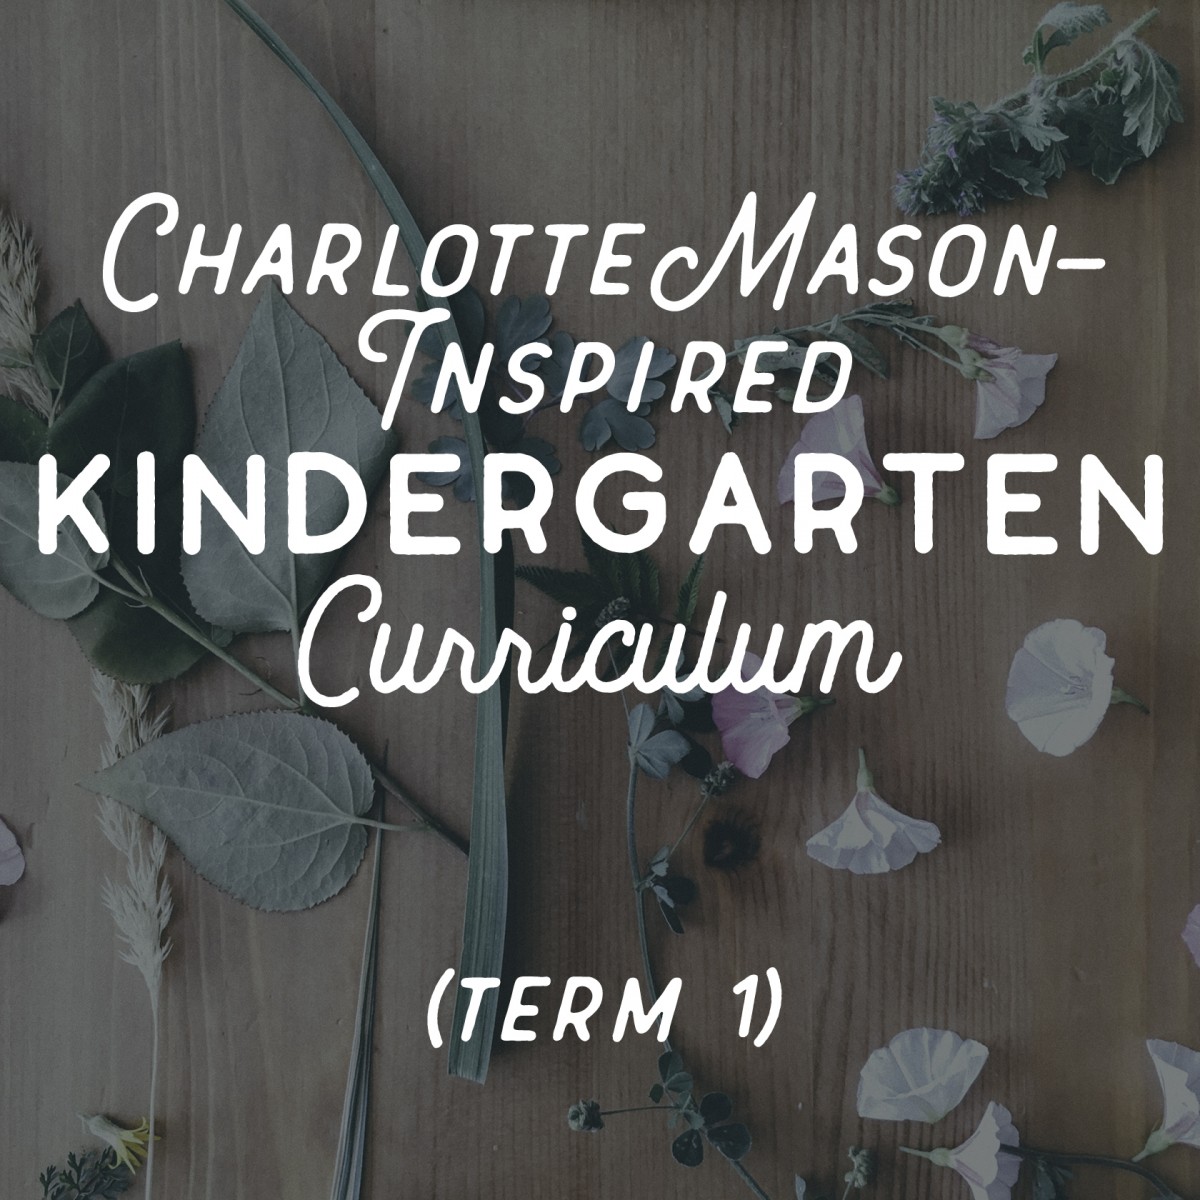 A Charlotte Mason Kindergarten (Year 0.5) Curriculum to download for personal use in your homeschool, including booklists and weekly schedules!